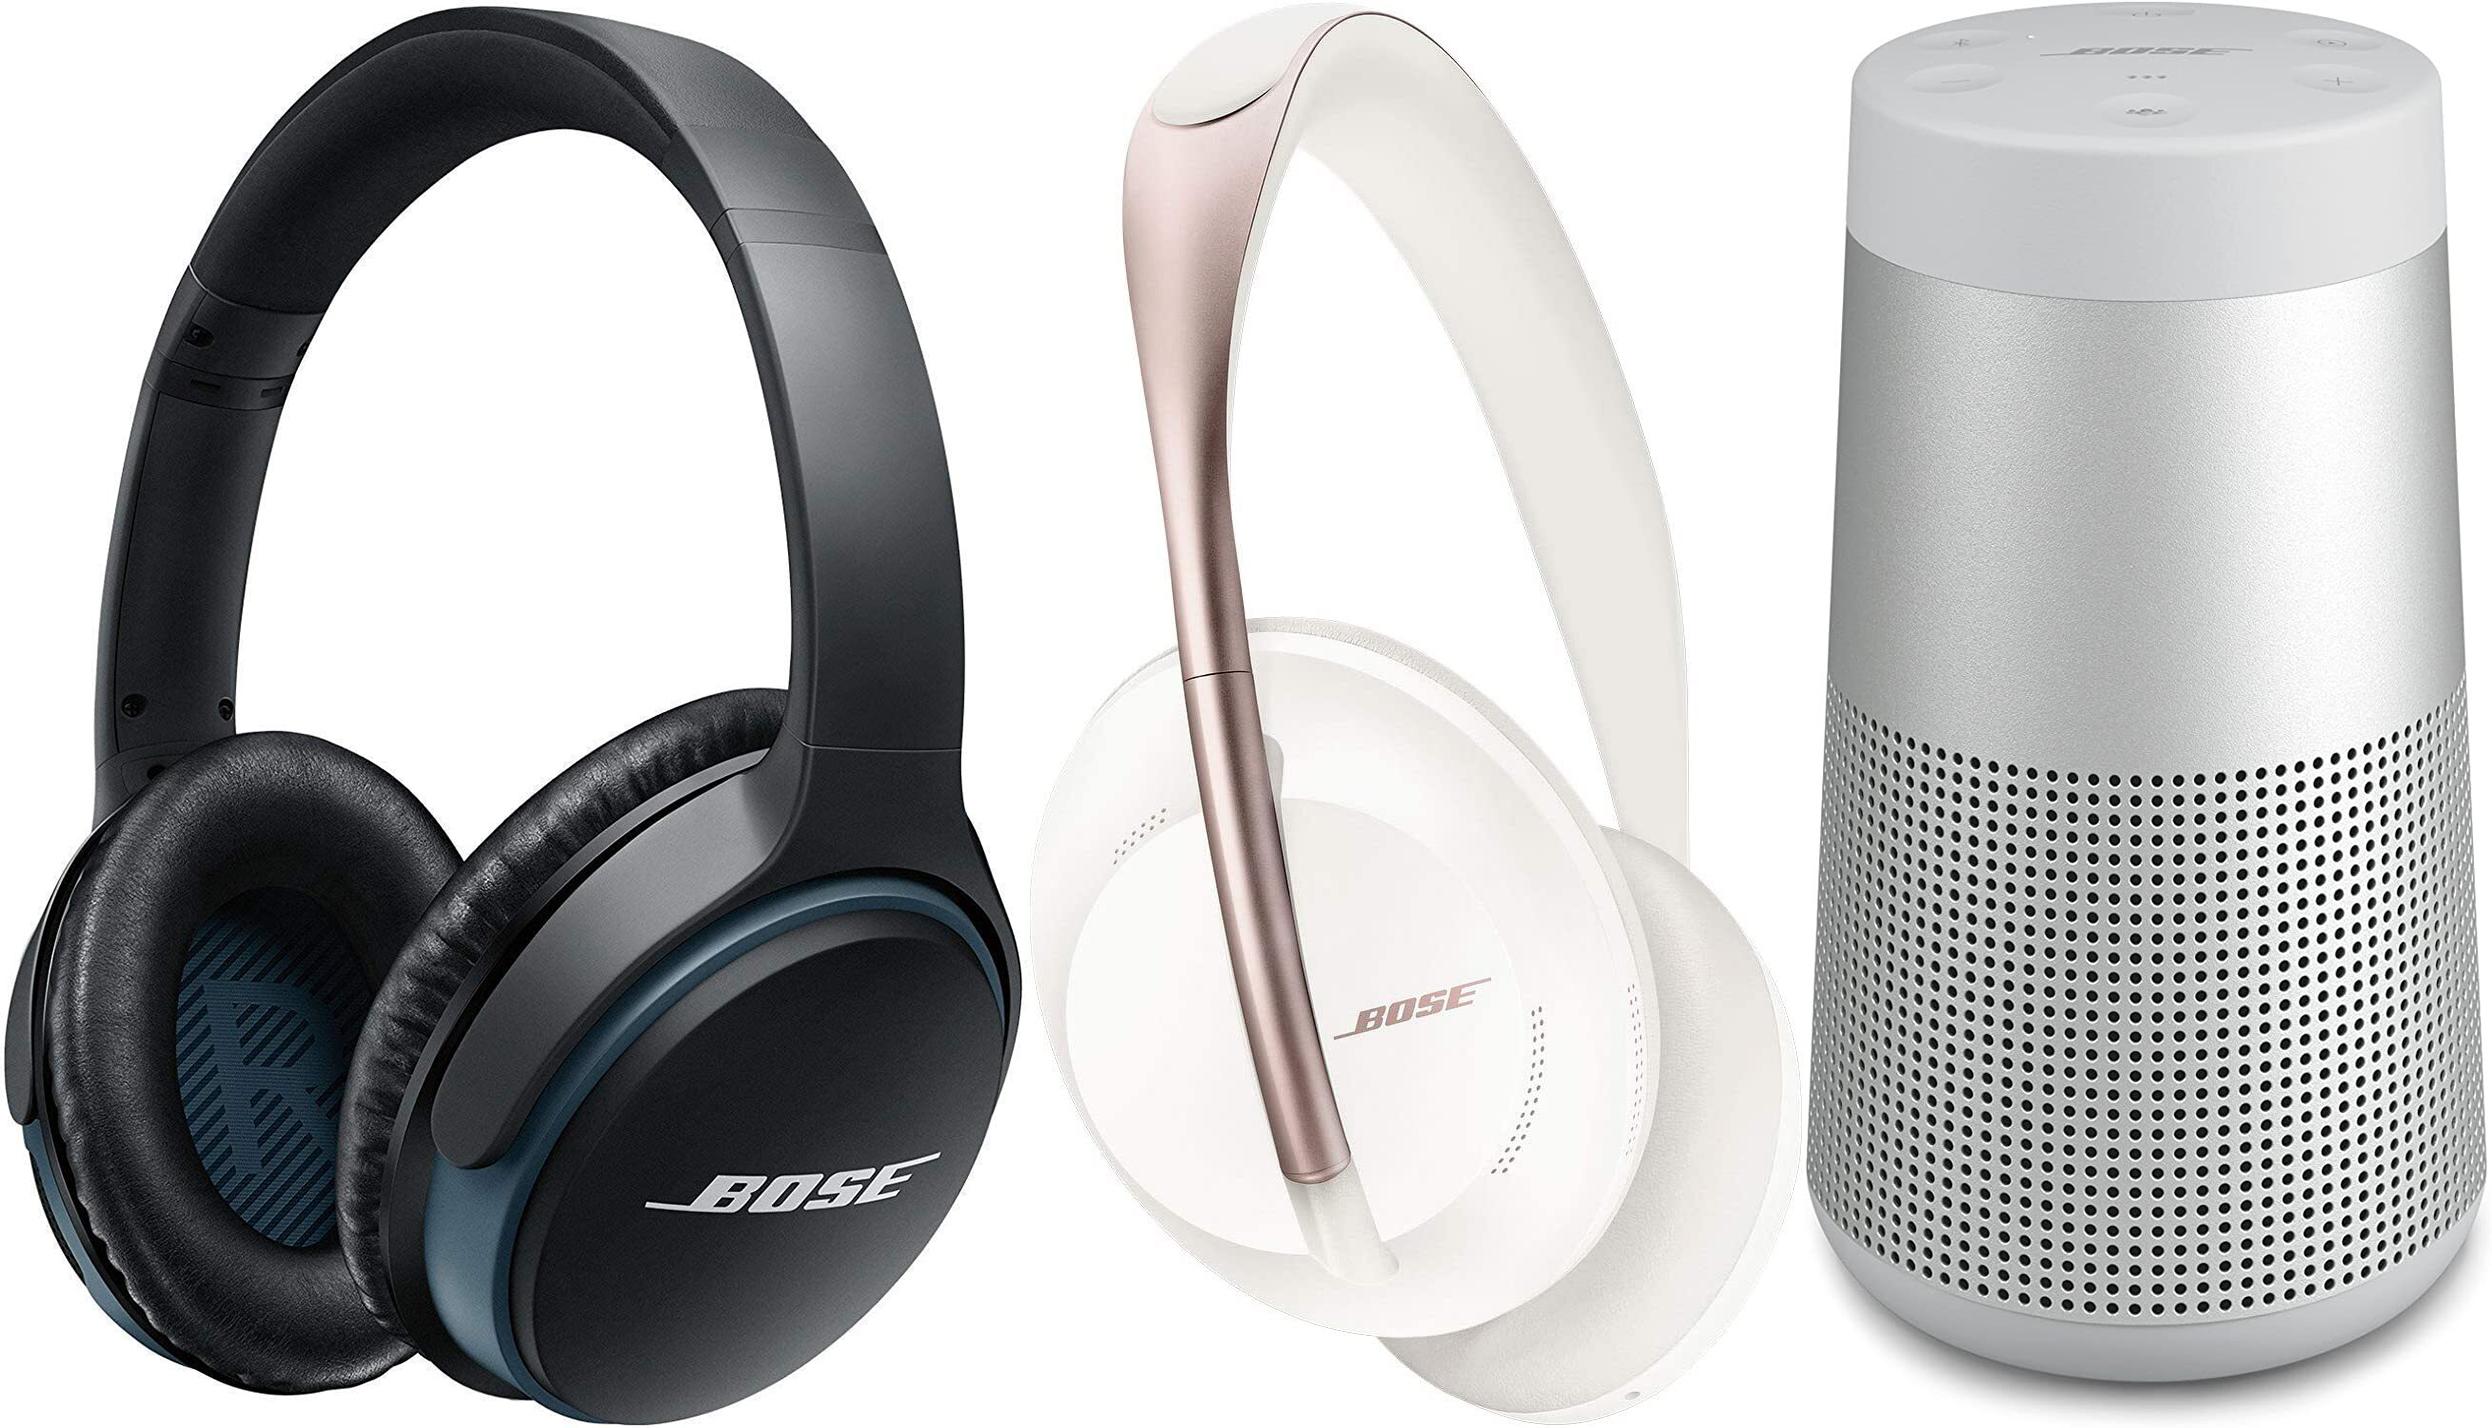 Grab Bose’s industry-leading noise cancelling headphones and portable speakers, cheaper than ever on Prime Day